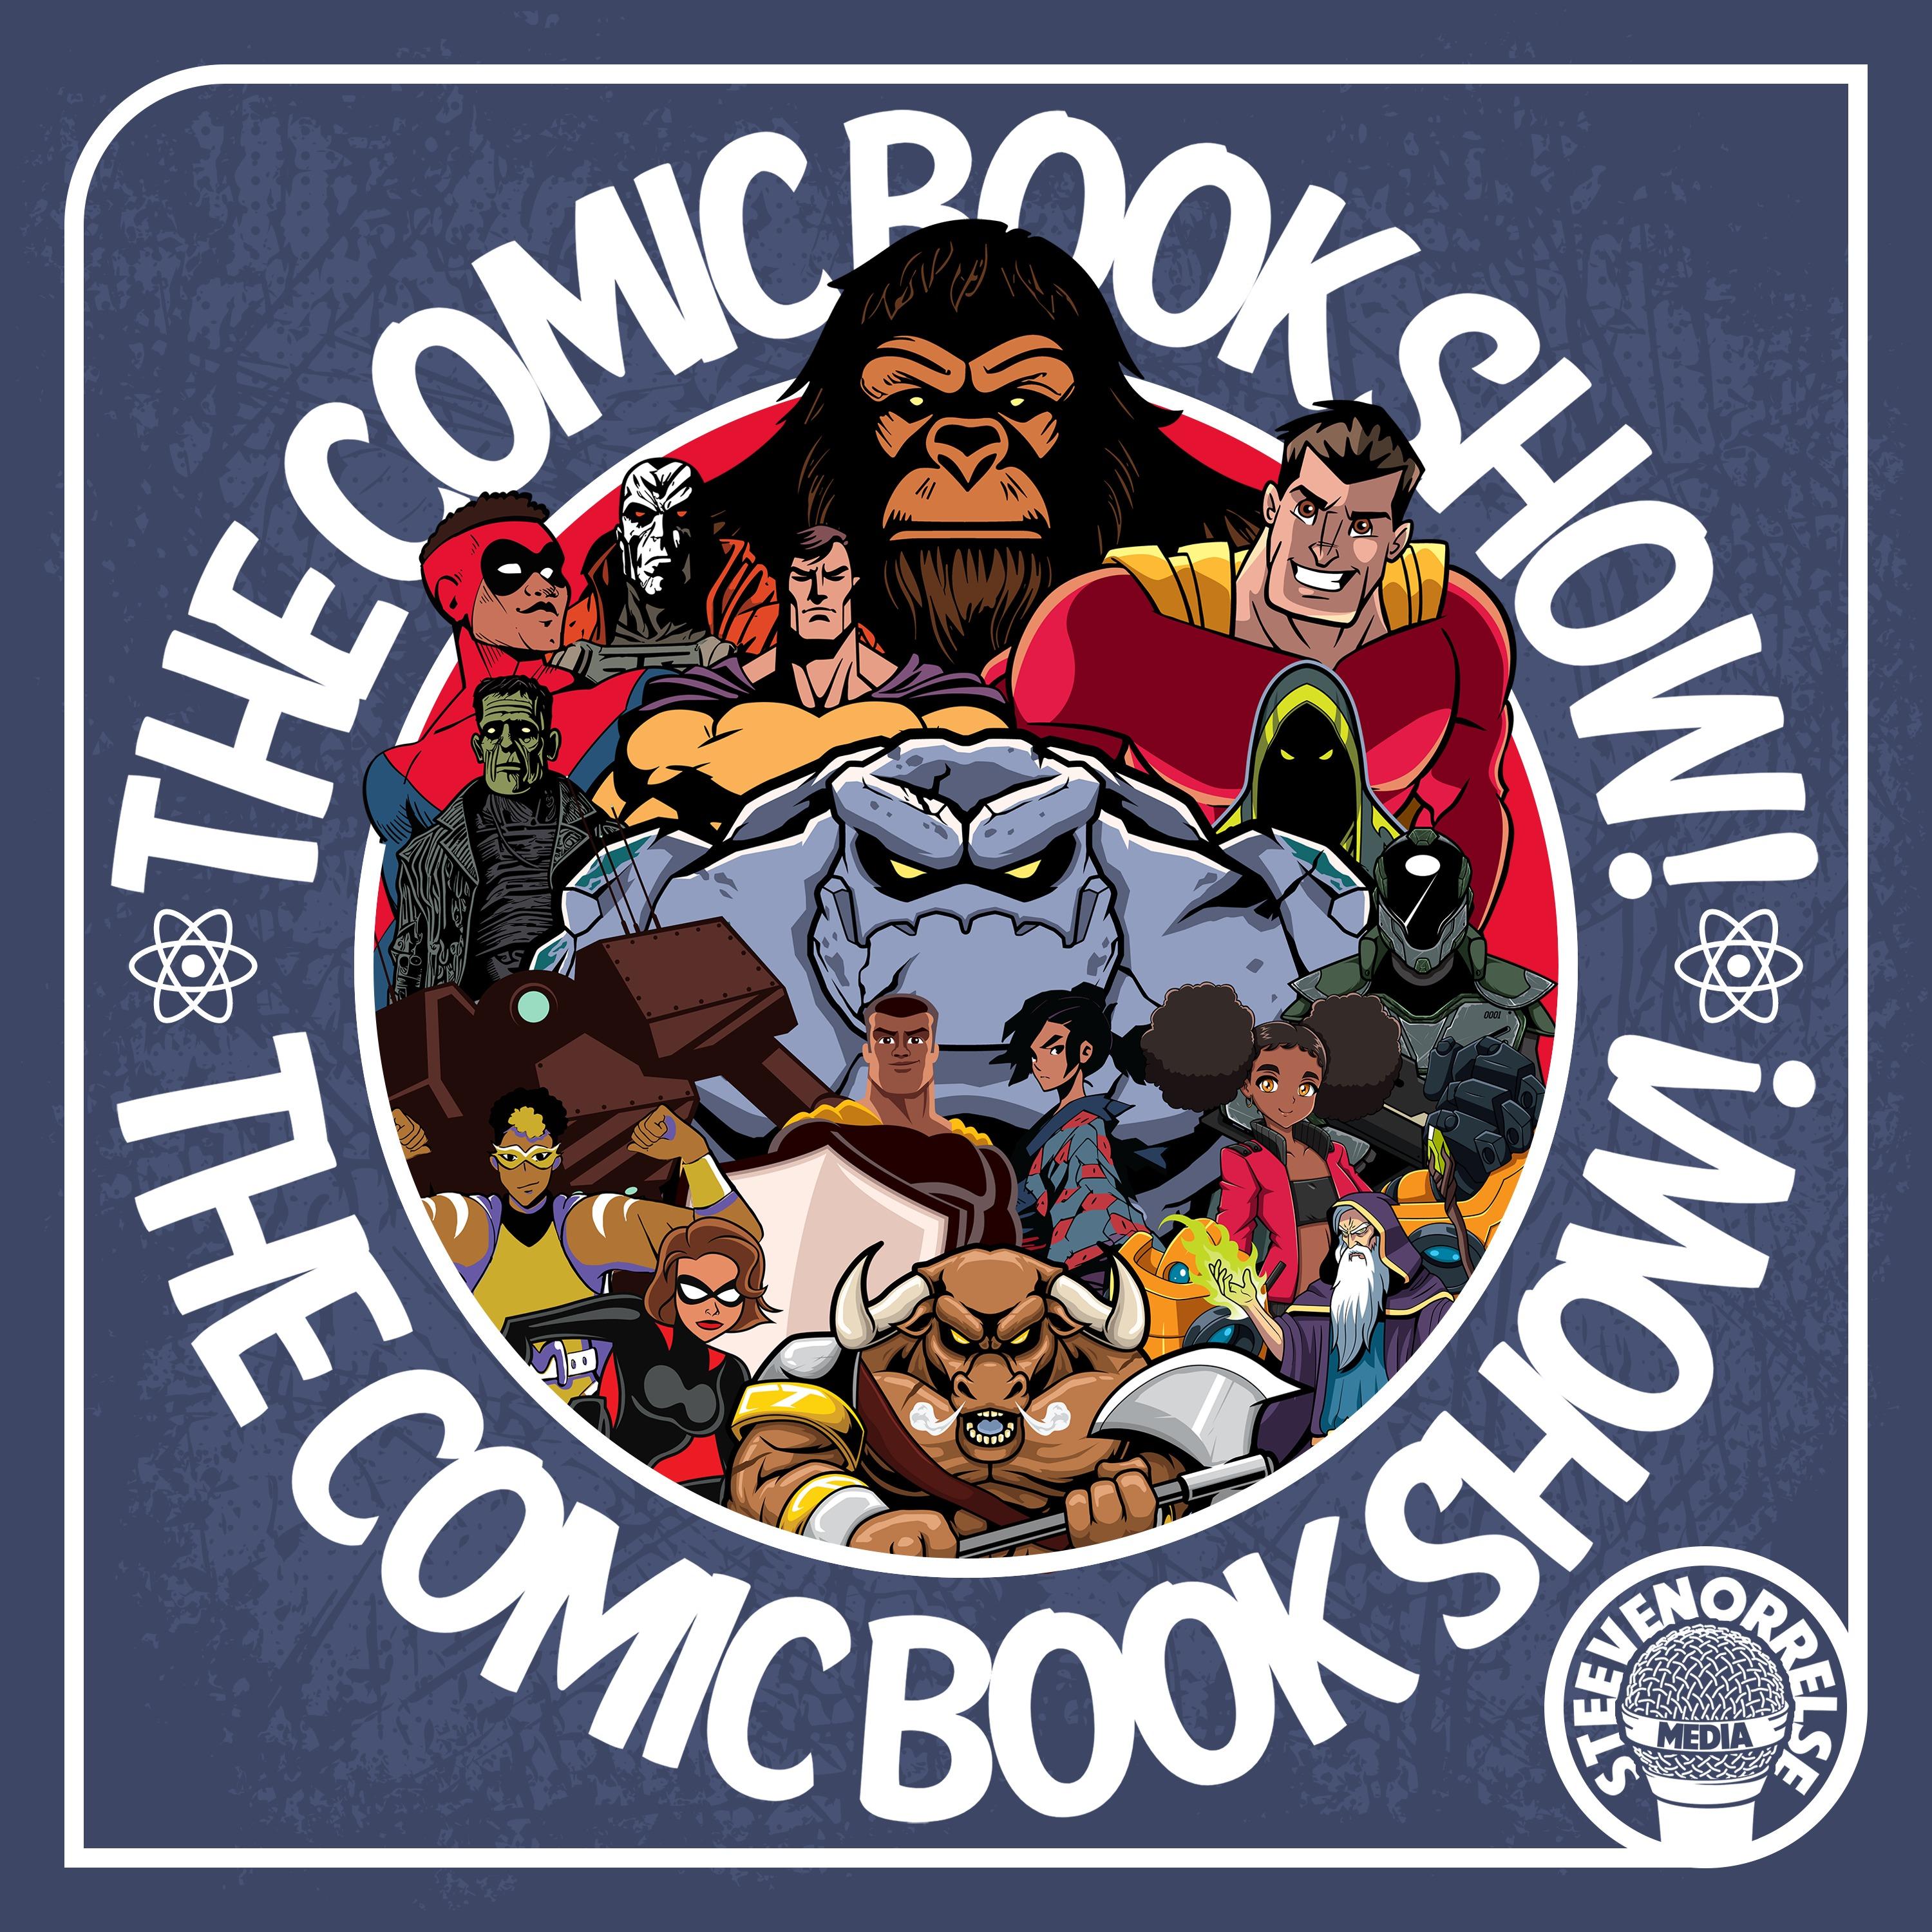 The Comic Book Show!